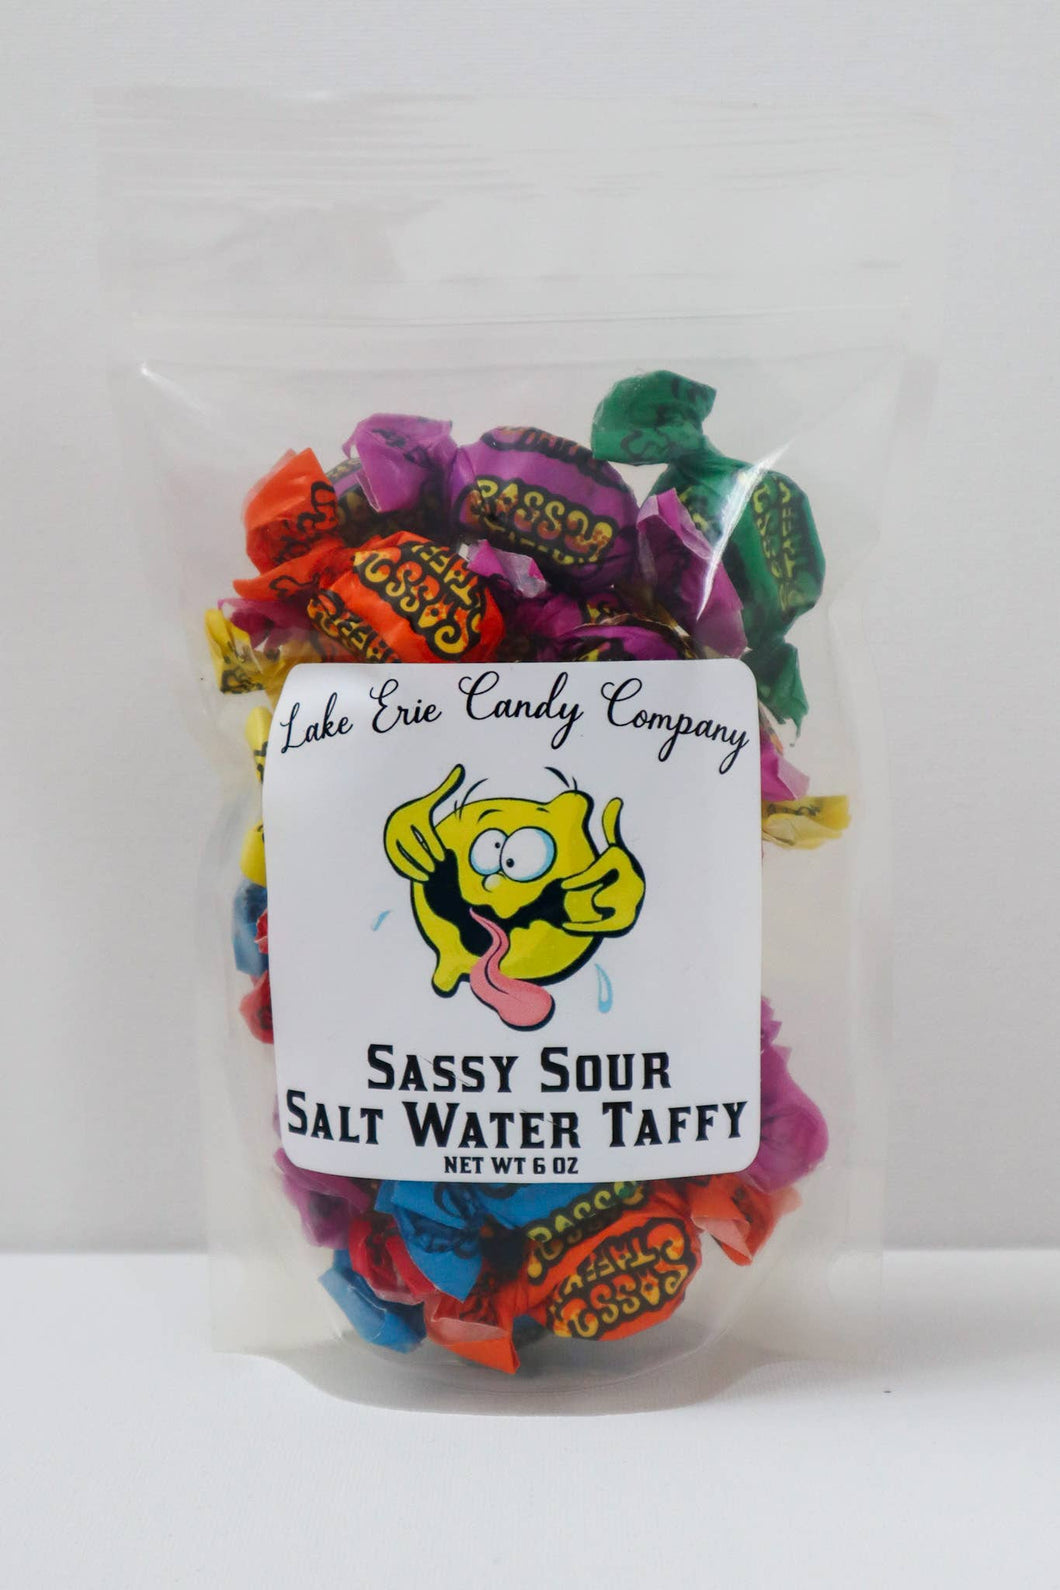 Lake Erie Candy Company - Sassy Sour Salt Water Taffy